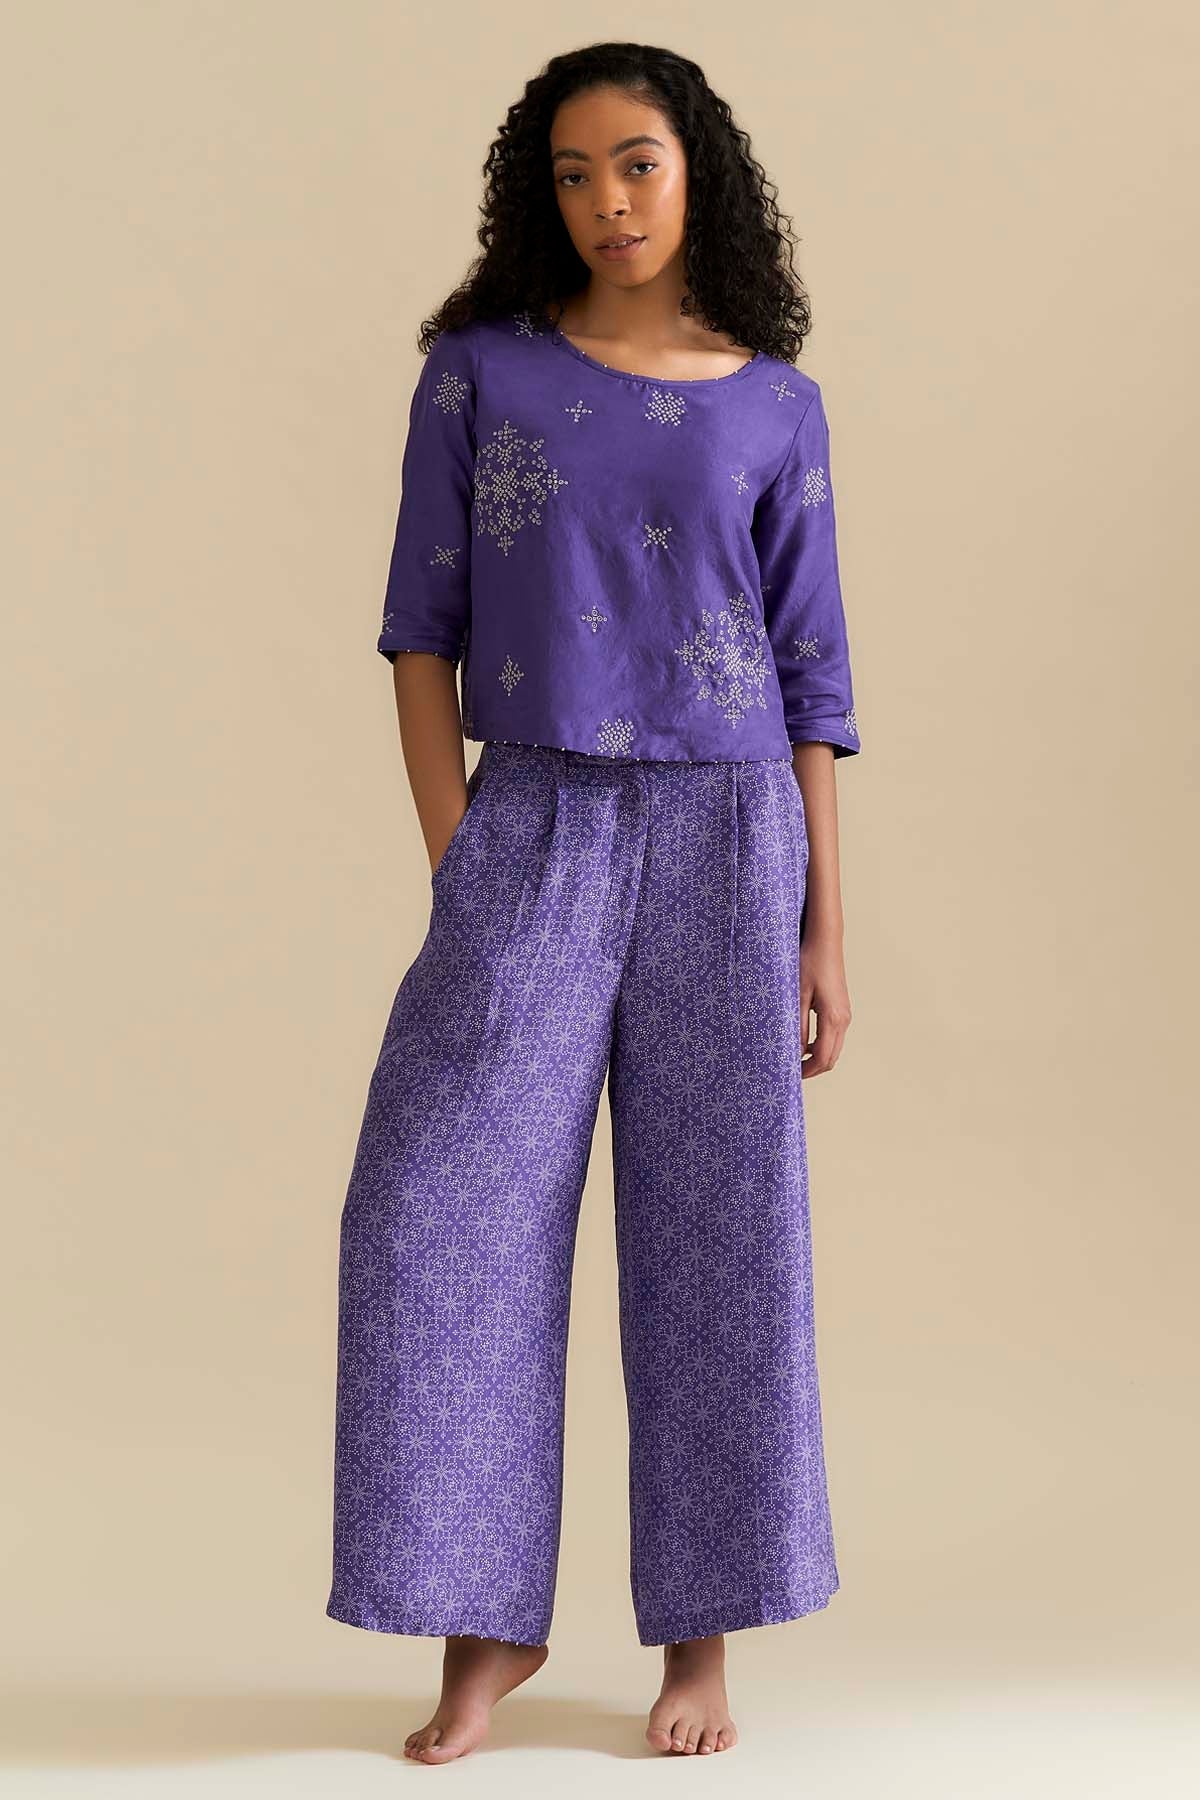 Srota by Srishti Aggarwal Purple Embroidered Top & Palazzo for women online at ScrollnShops